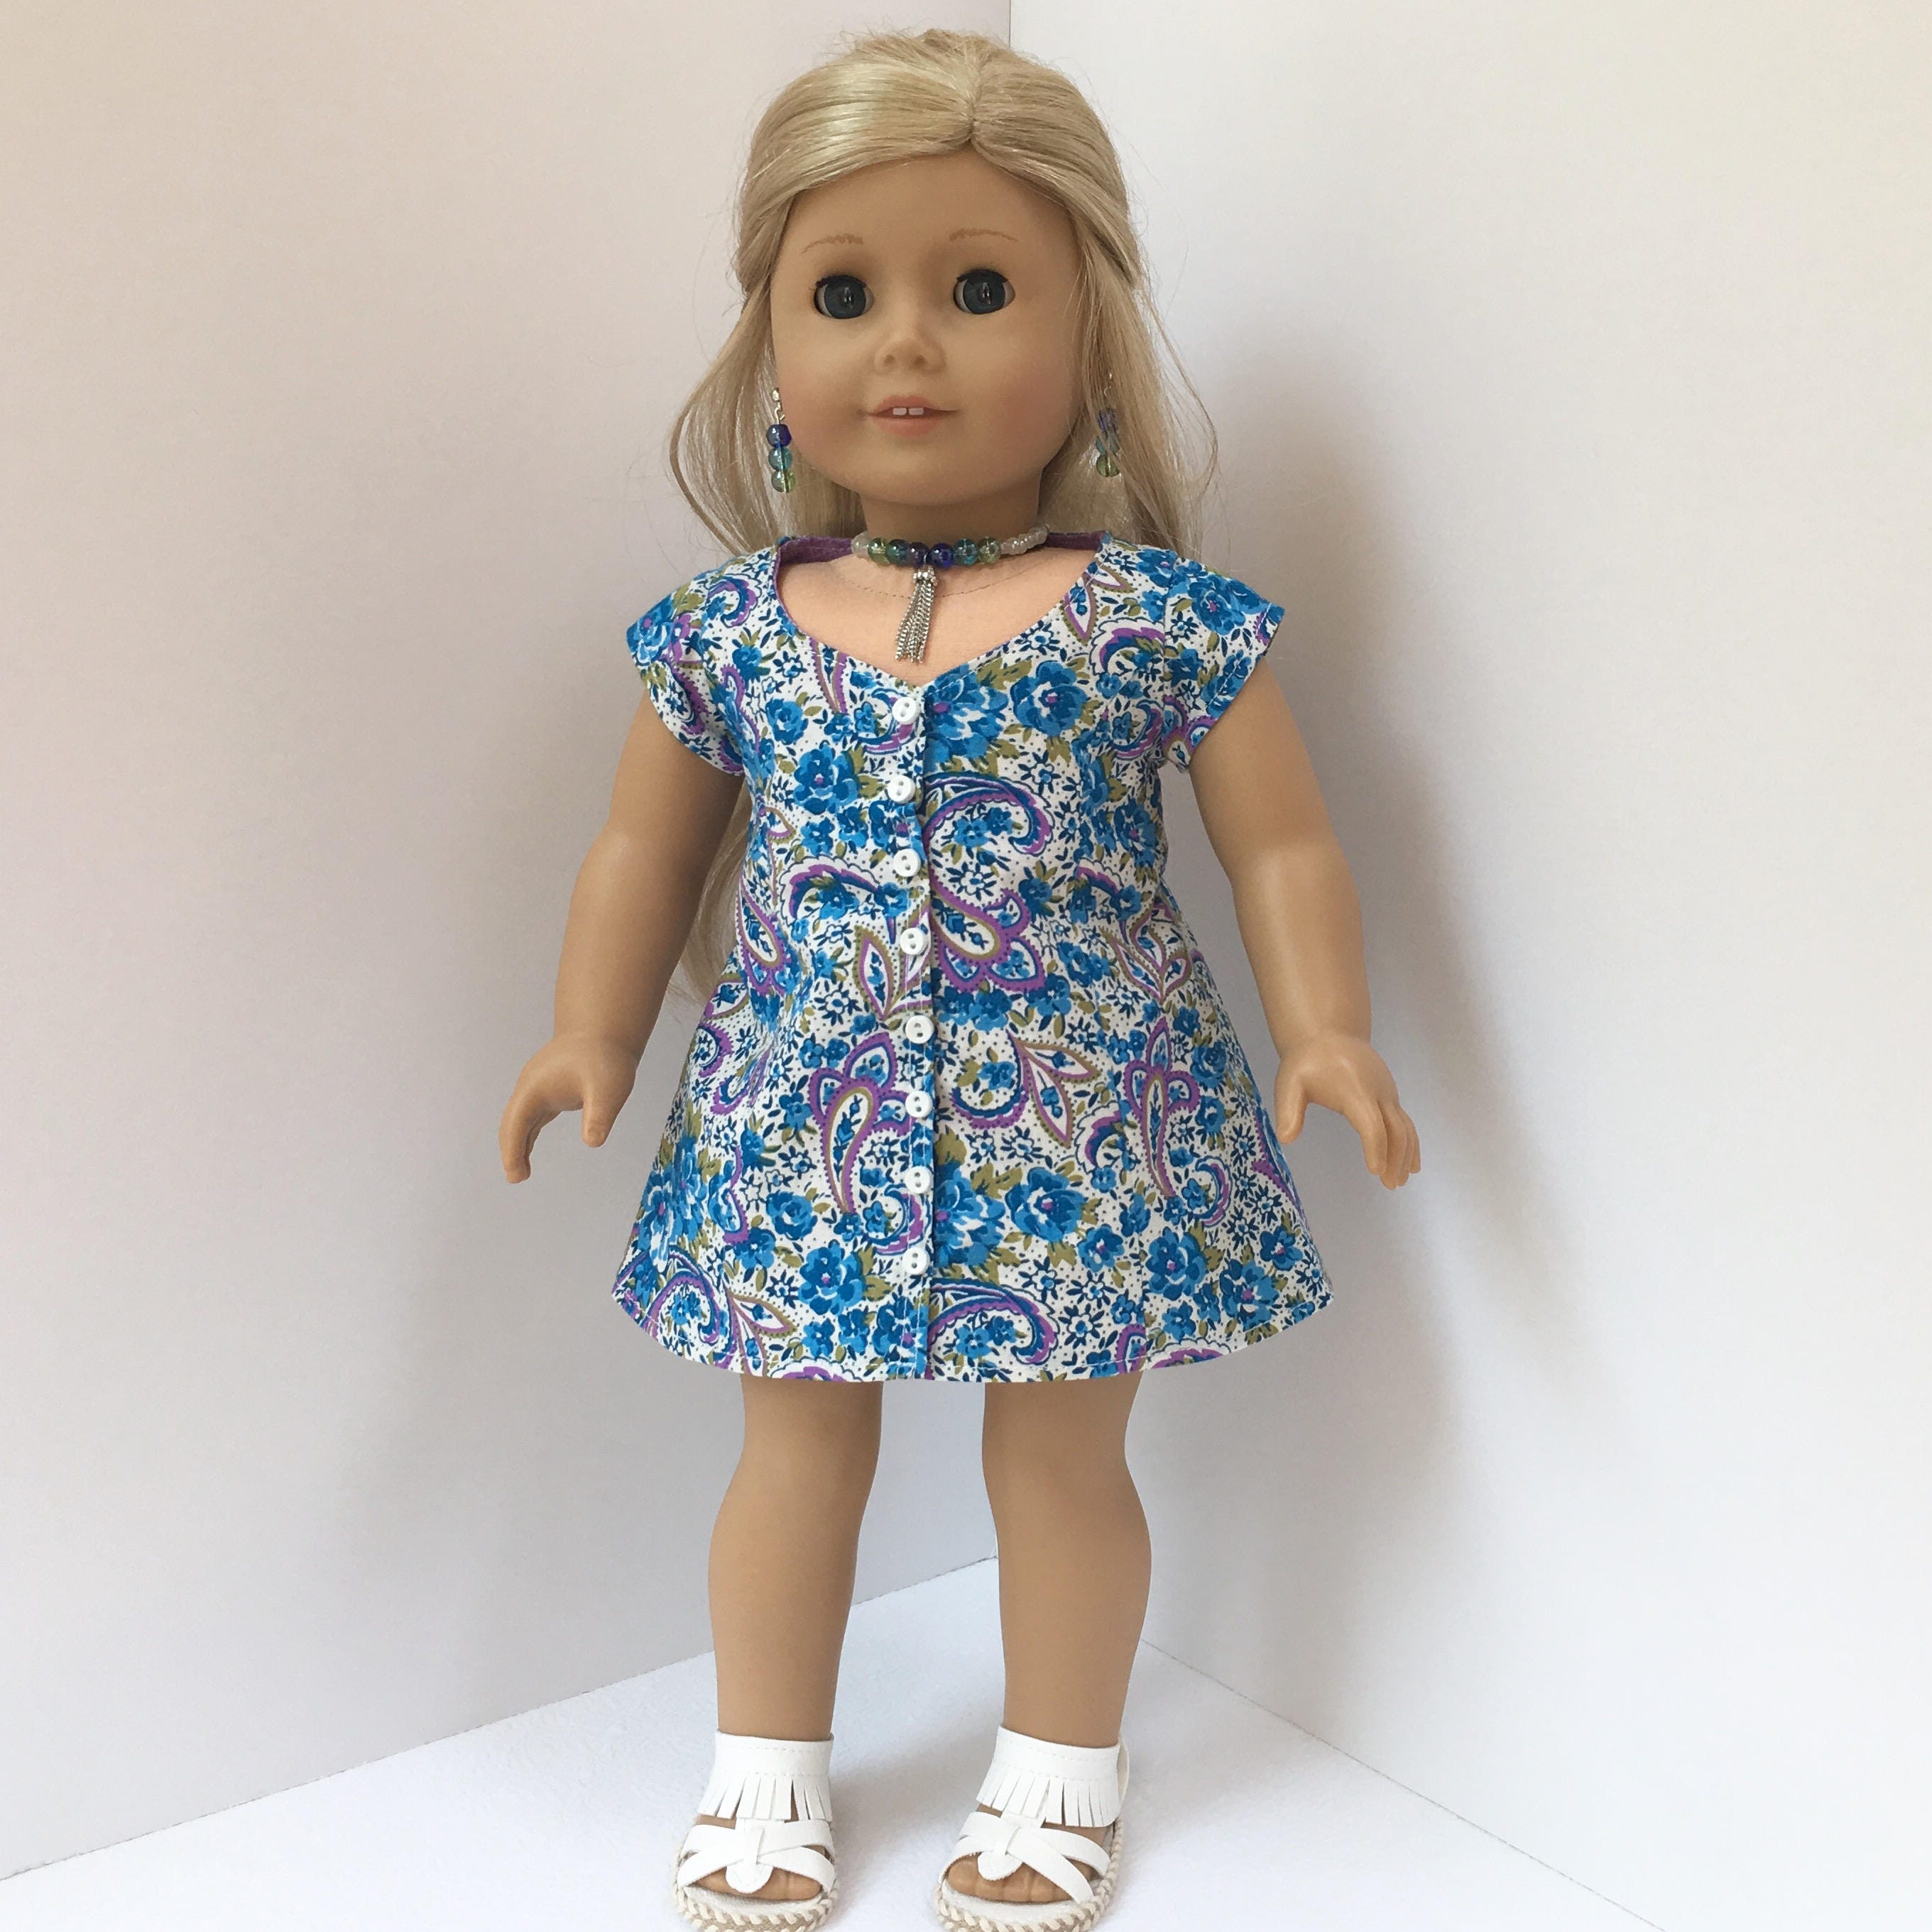 Turquoise Paisley A-line Dress With Lace up Back AG Doll | Etsy